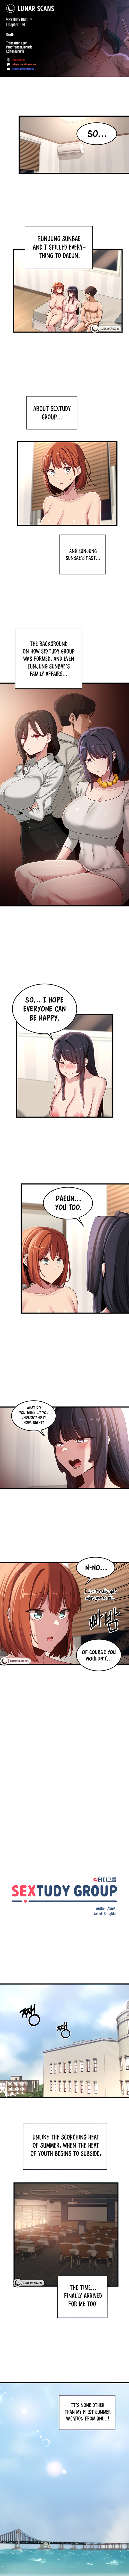 Panel Image 1 for chapter 109 of manhwa Sex Study Group on read.oppai.stream